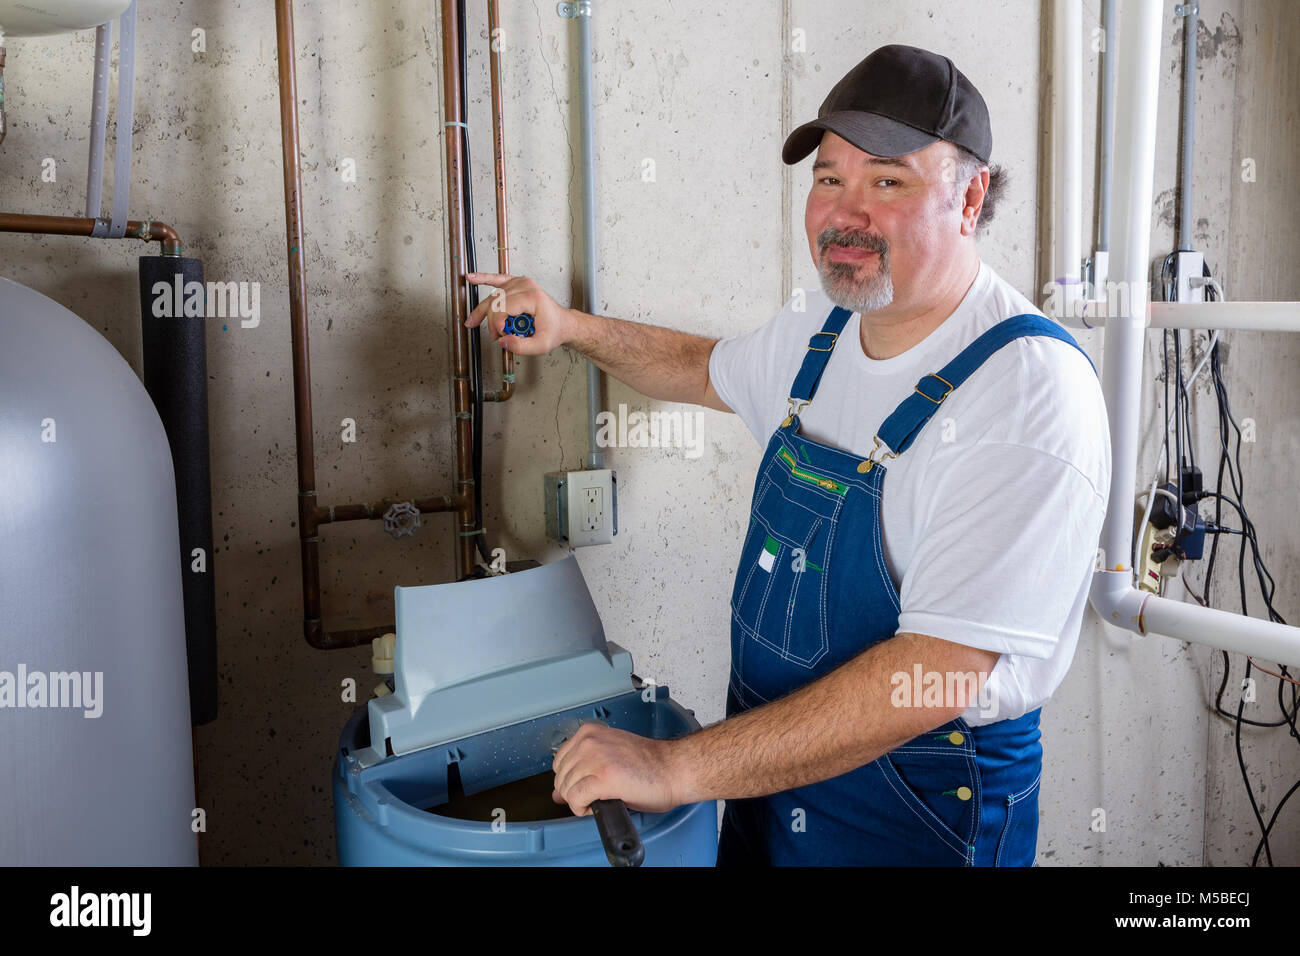 Friendly smiling workman in dungarees installing or working on a water softener in a utility room turning to smile at the camera Stock Photo